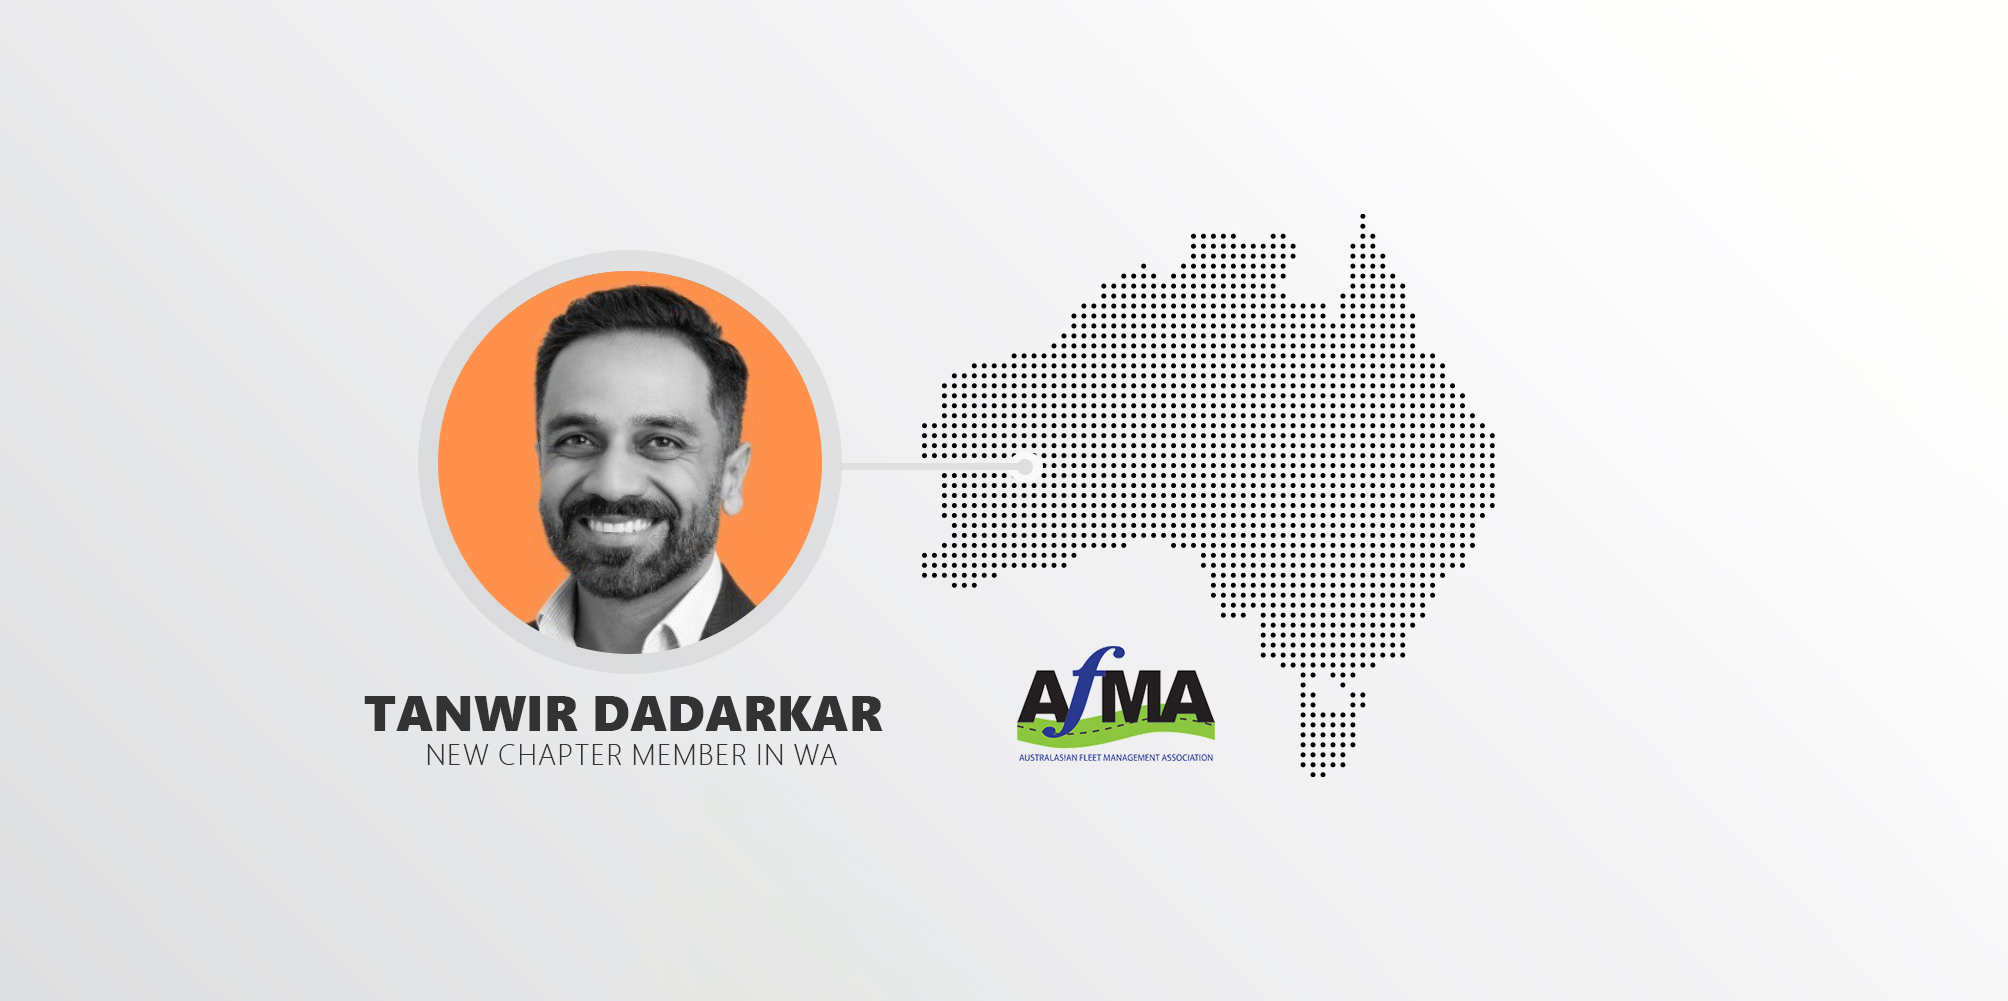 Welcoming Tanwir Dadarkar to the Western Australia Chapter Committee of AfMA